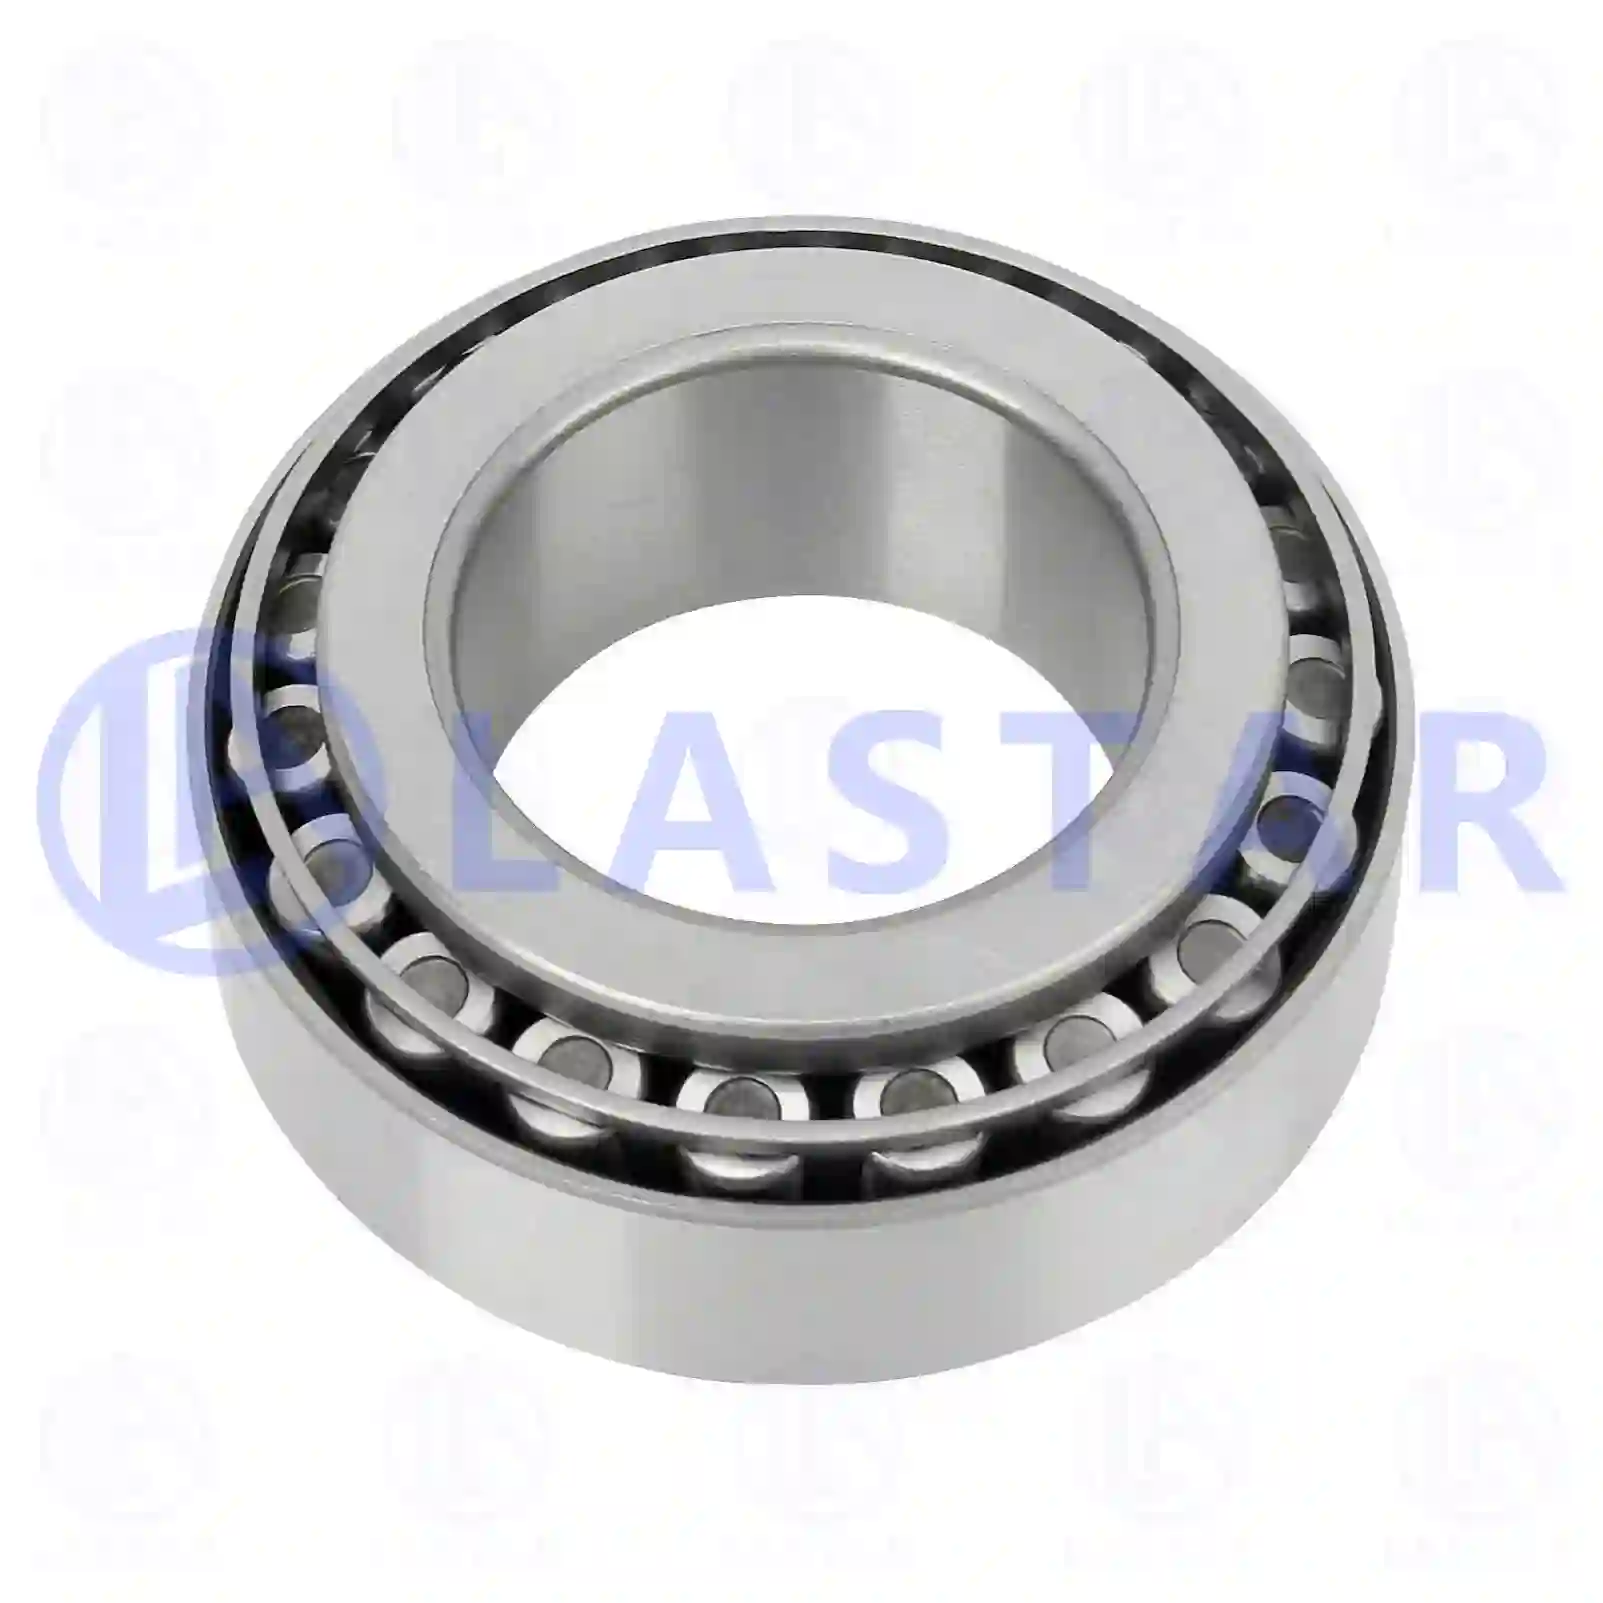 Tapered roller bearing, 77726218, 614943, 000637027, 01905492, 01905492, 07181852, 42118991, 06324890004, 06324890041, 63248900004, 81934200072, N1011053440, 0029817905, 0039818305, 0049814205, 0059814005, 5000442185, 5000442186, 5000442189, 5000470672, 5000470861, 5000669957, 5010439057 ||  77726218 Lastar Spare Part | Truck Spare Parts, Auotomotive Spare Parts Tapered roller bearing, 77726218, 614943, 000637027, 01905492, 01905492, 07181852, 42118991, 06324890004, 06324890041, 63248900004, 81934200072, N1011053440, 0029817905, 0039818305, 0049814205, 0059814005, 5000442185, 5000442186, 5000442189, 5000470672, 5000470861, 5000669957, 5010439057 ||  77726218 Lastar Spare Part | Truck Spare Parts, Auotomotive Spare Parts